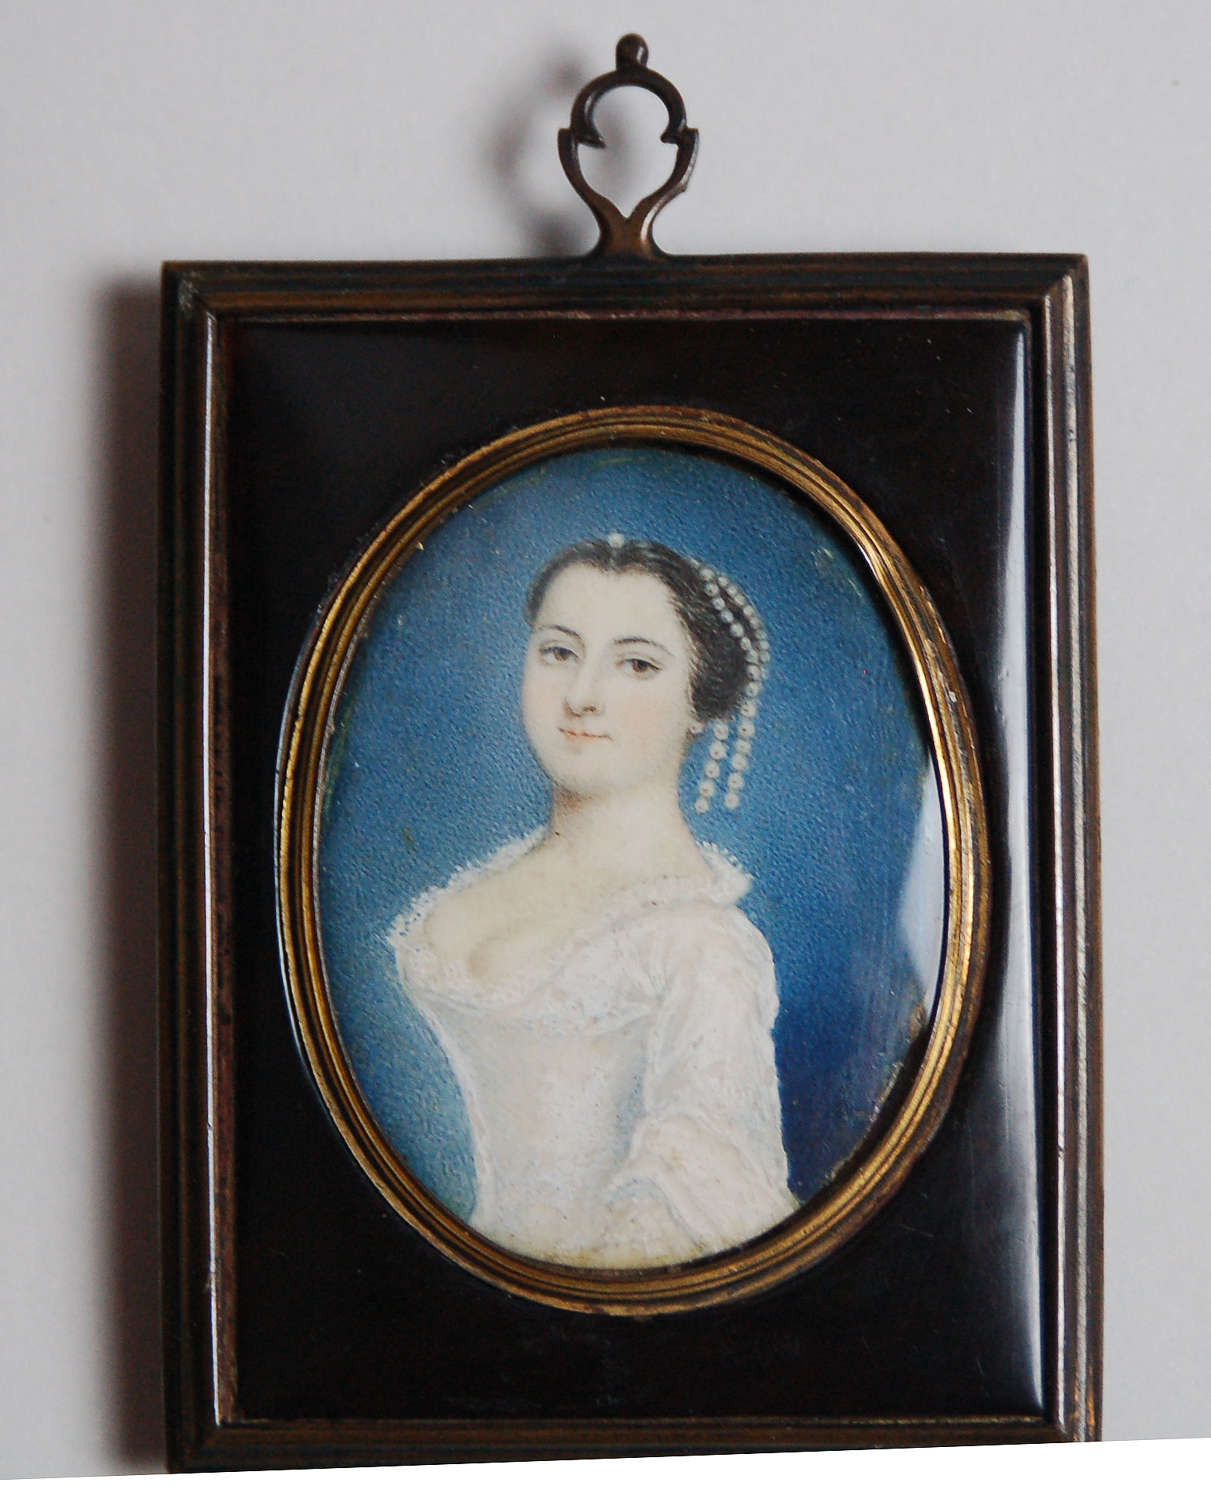 Miniature of lady in wedding gown attrib P P Lens C1730